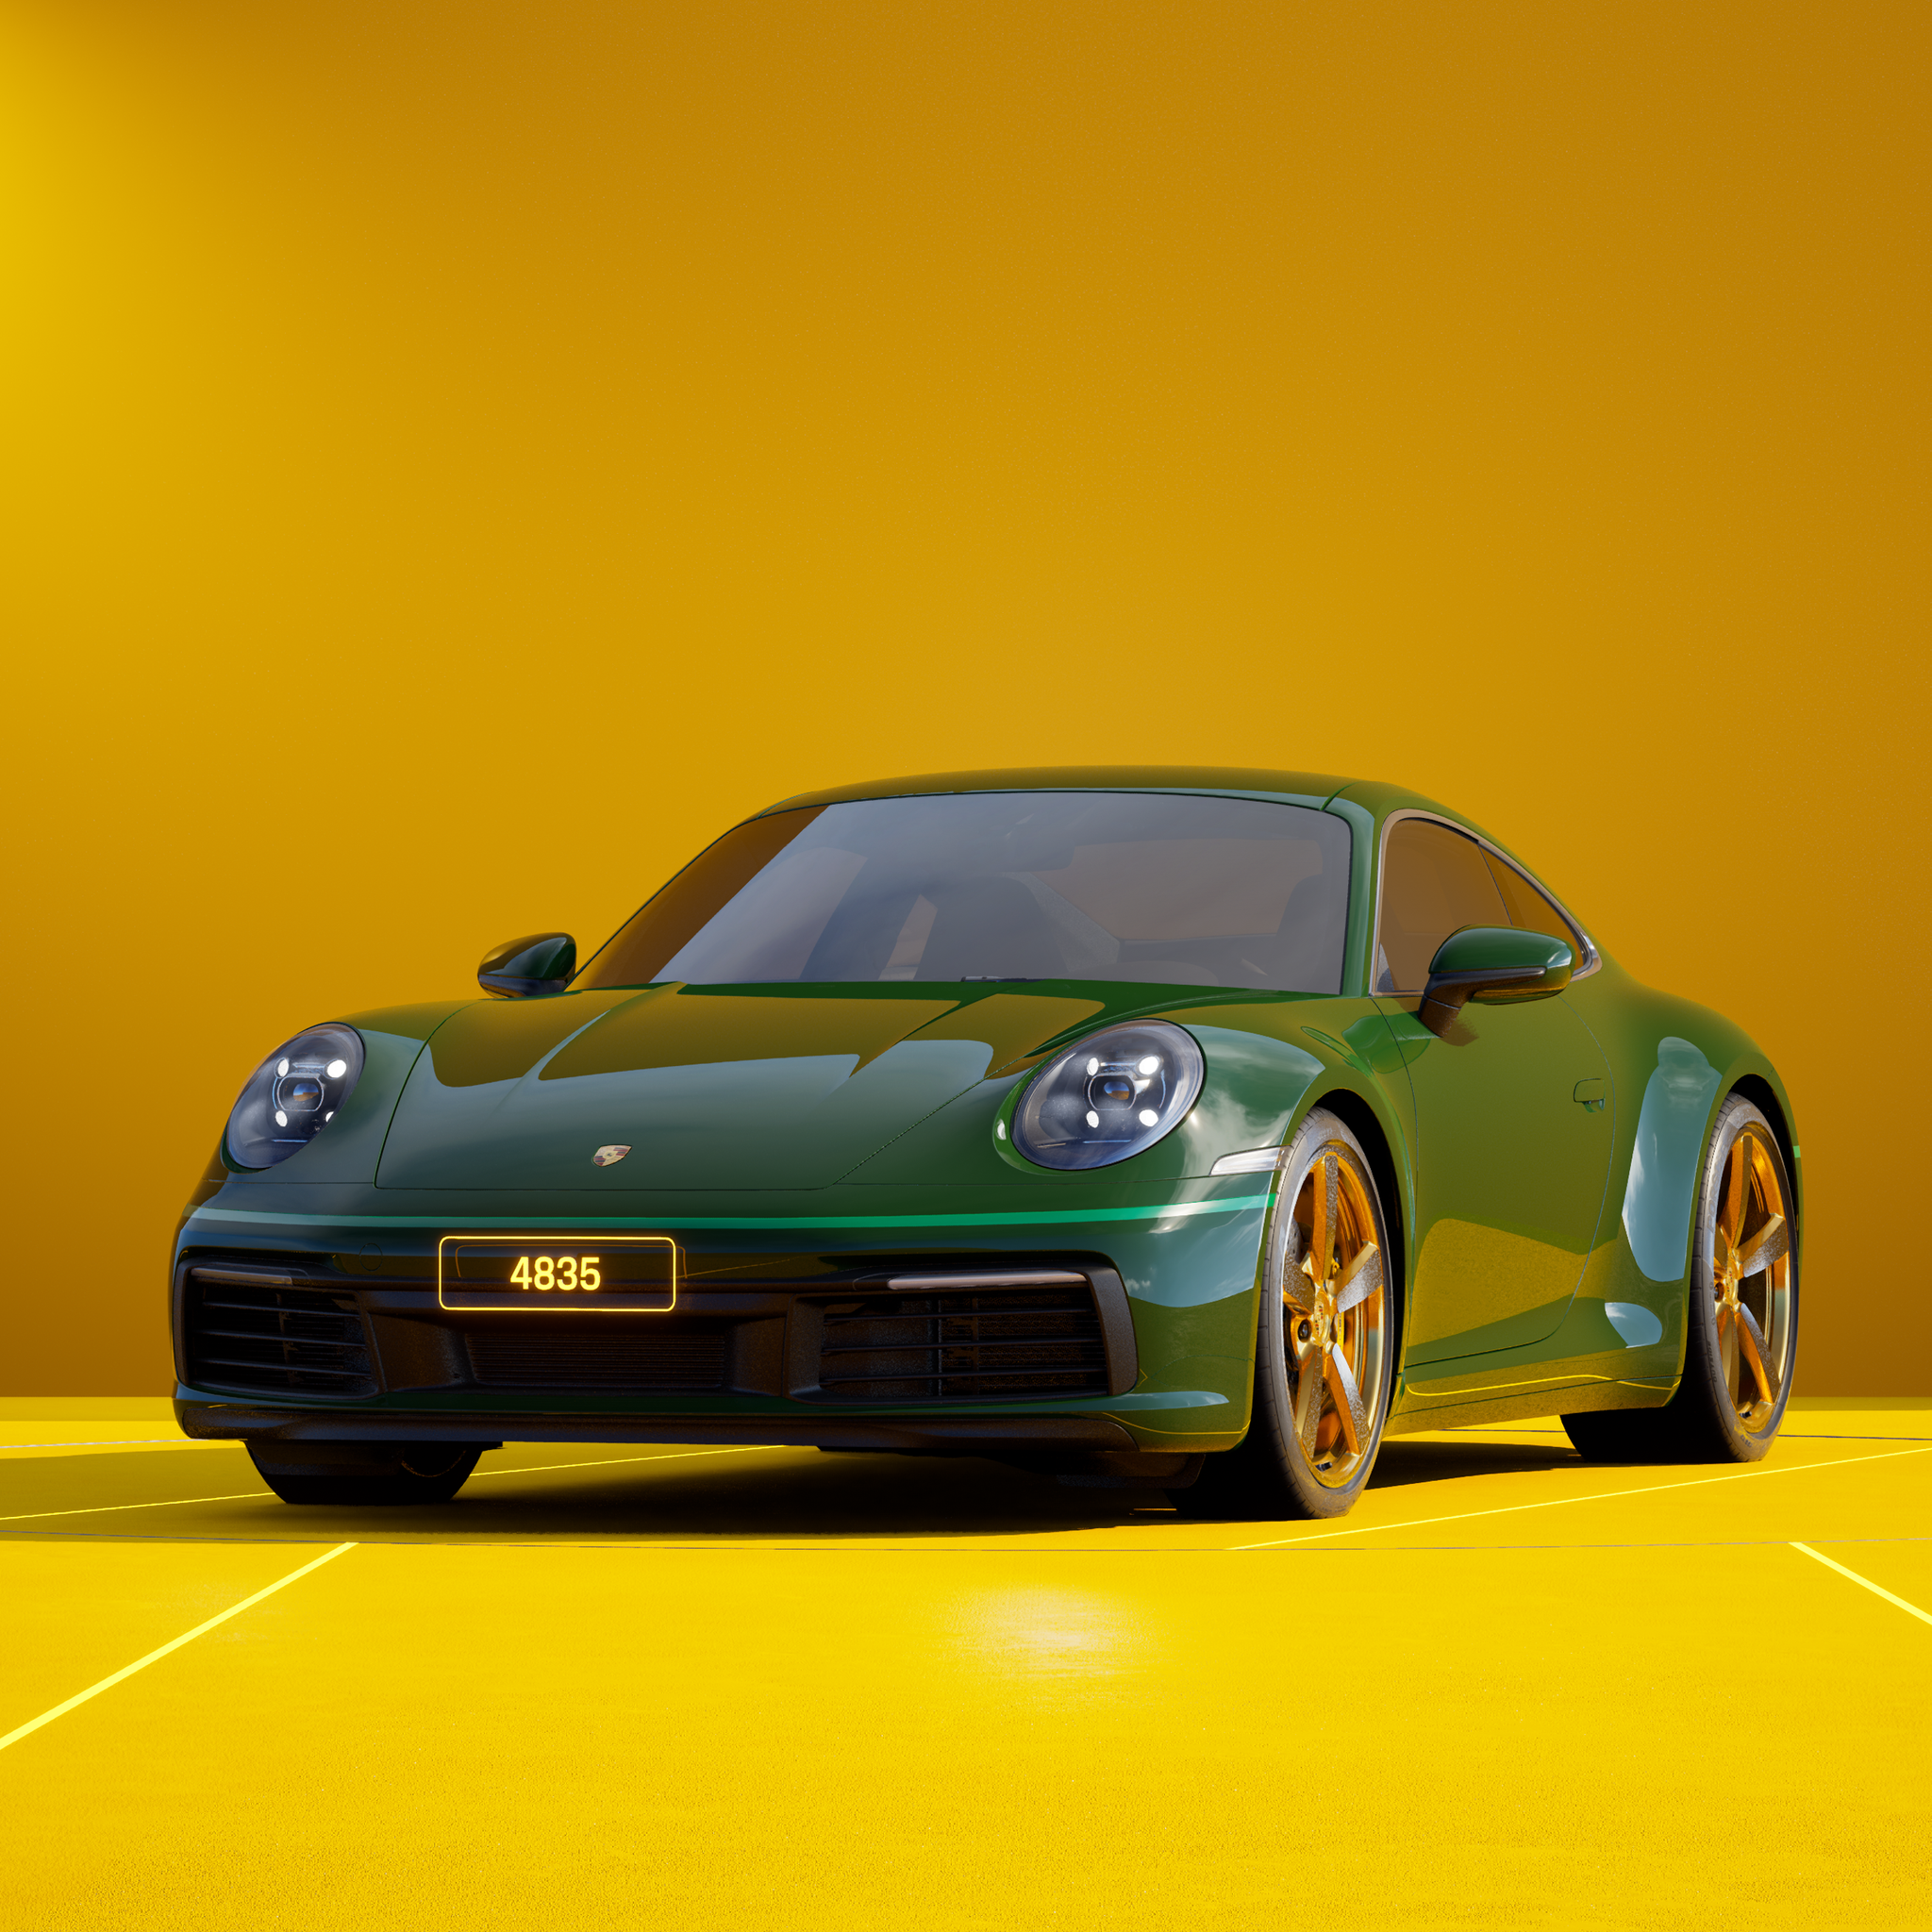 The PORSCHΞ 911 4835 image in phase